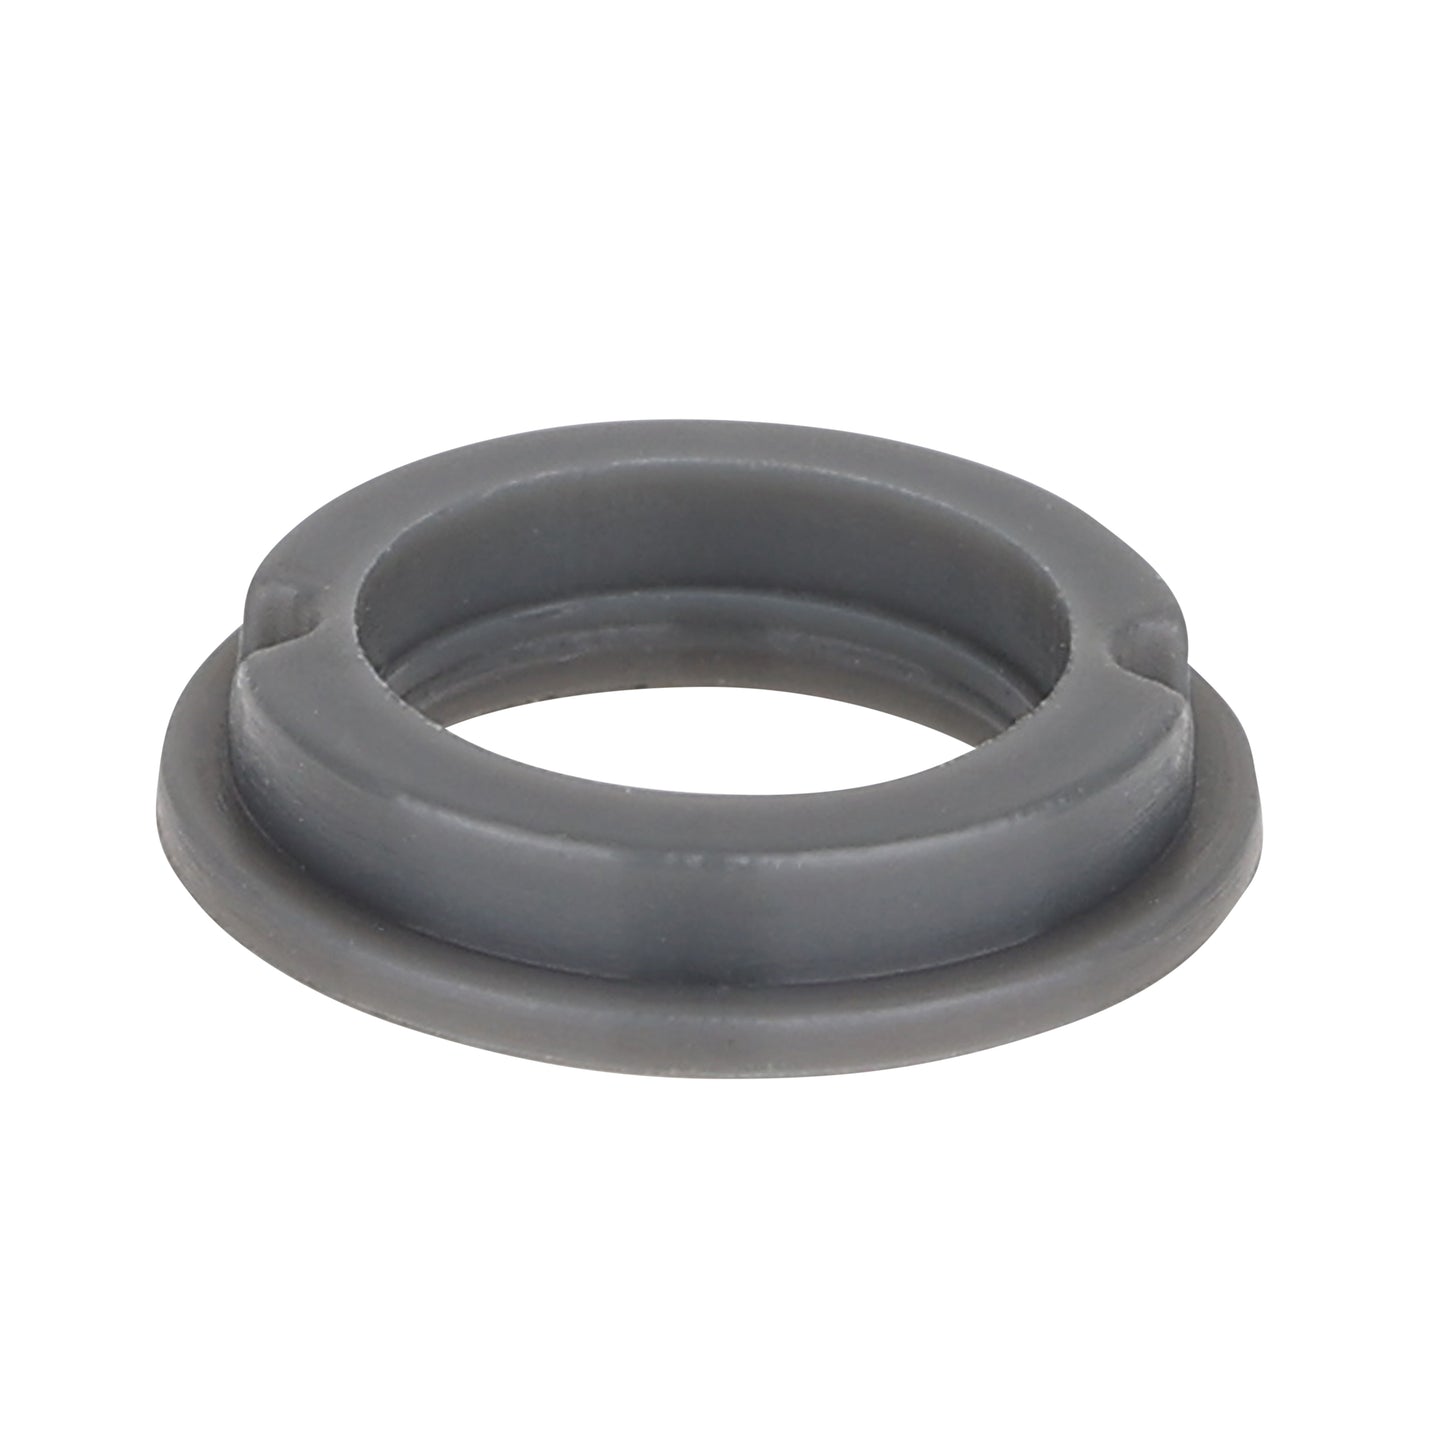 denso fuel injectors lower o-ring retainer